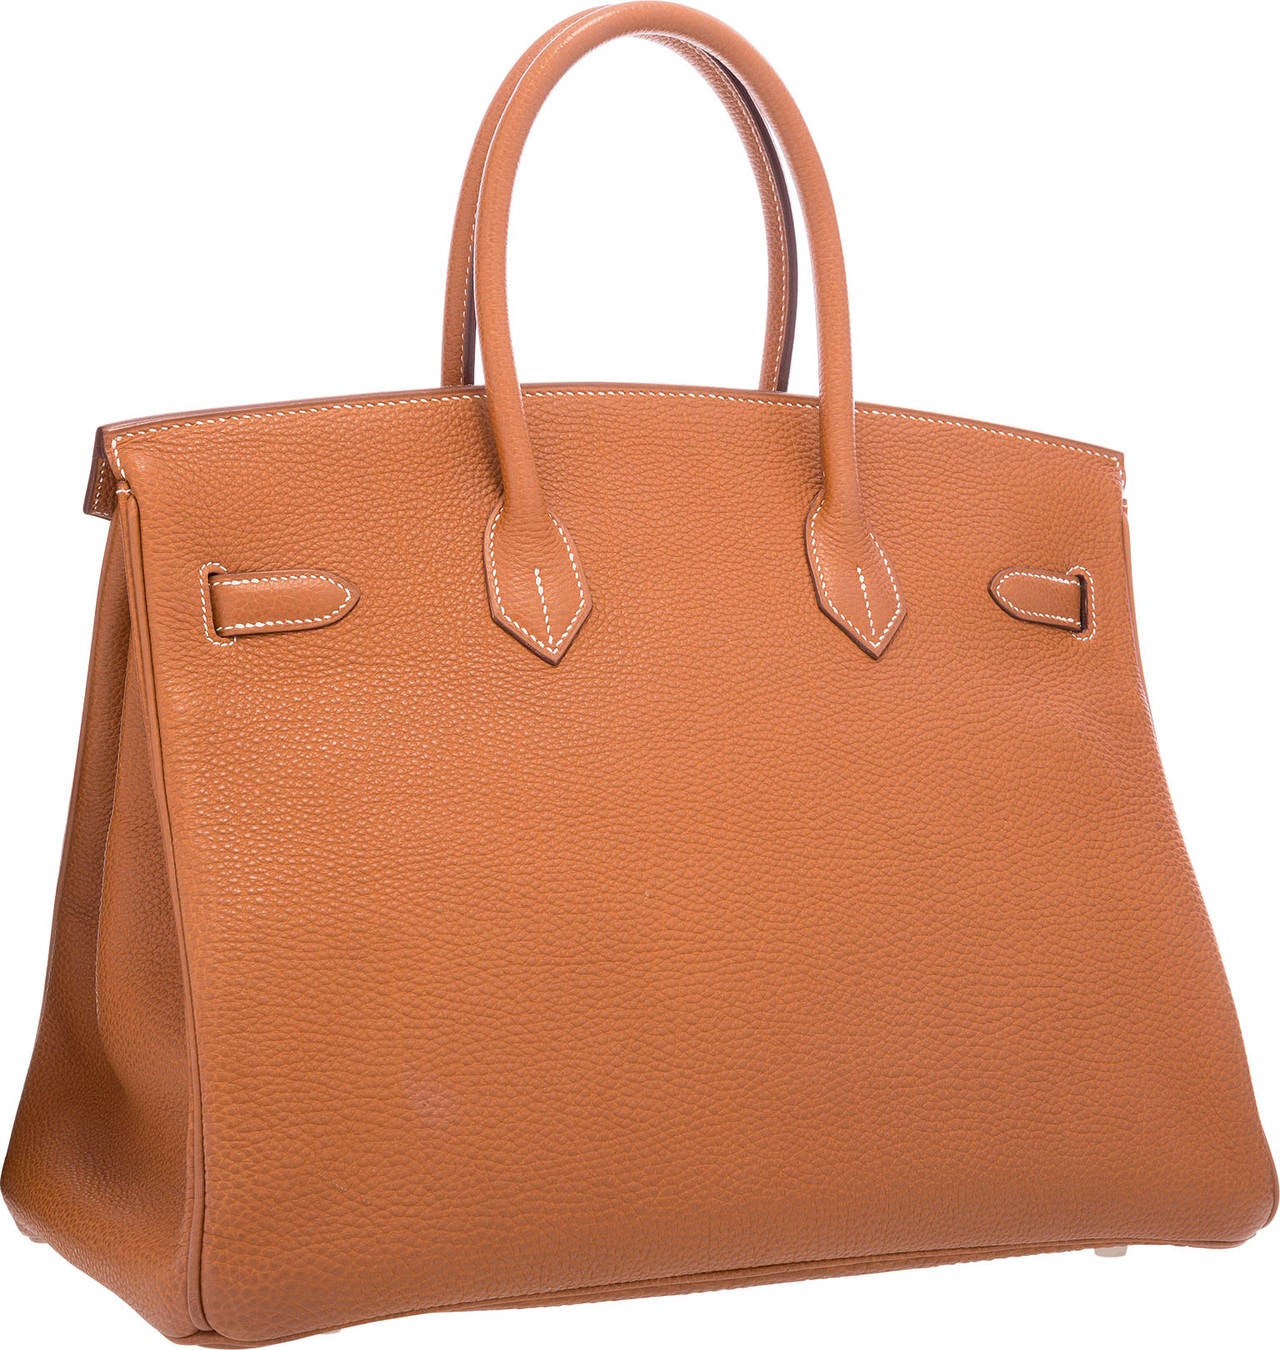 Hermes 35cm Gold Fjord Leather Birkin Bag with Gold Hardware In Good Condition For Sale In New York, NY